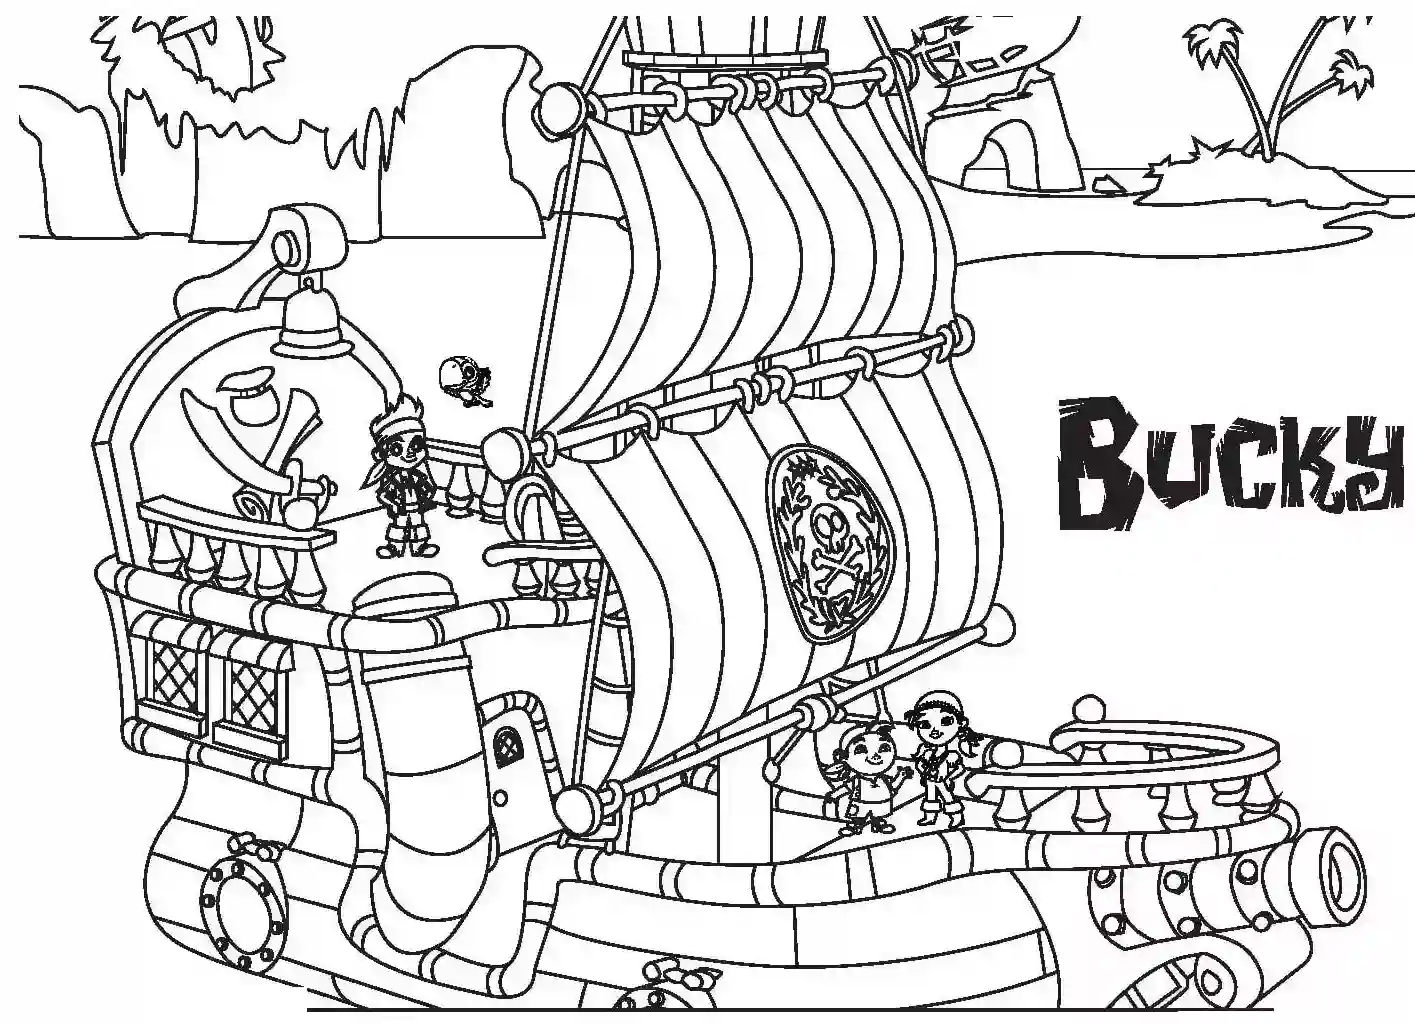 Pirates Bucky coloring book pages